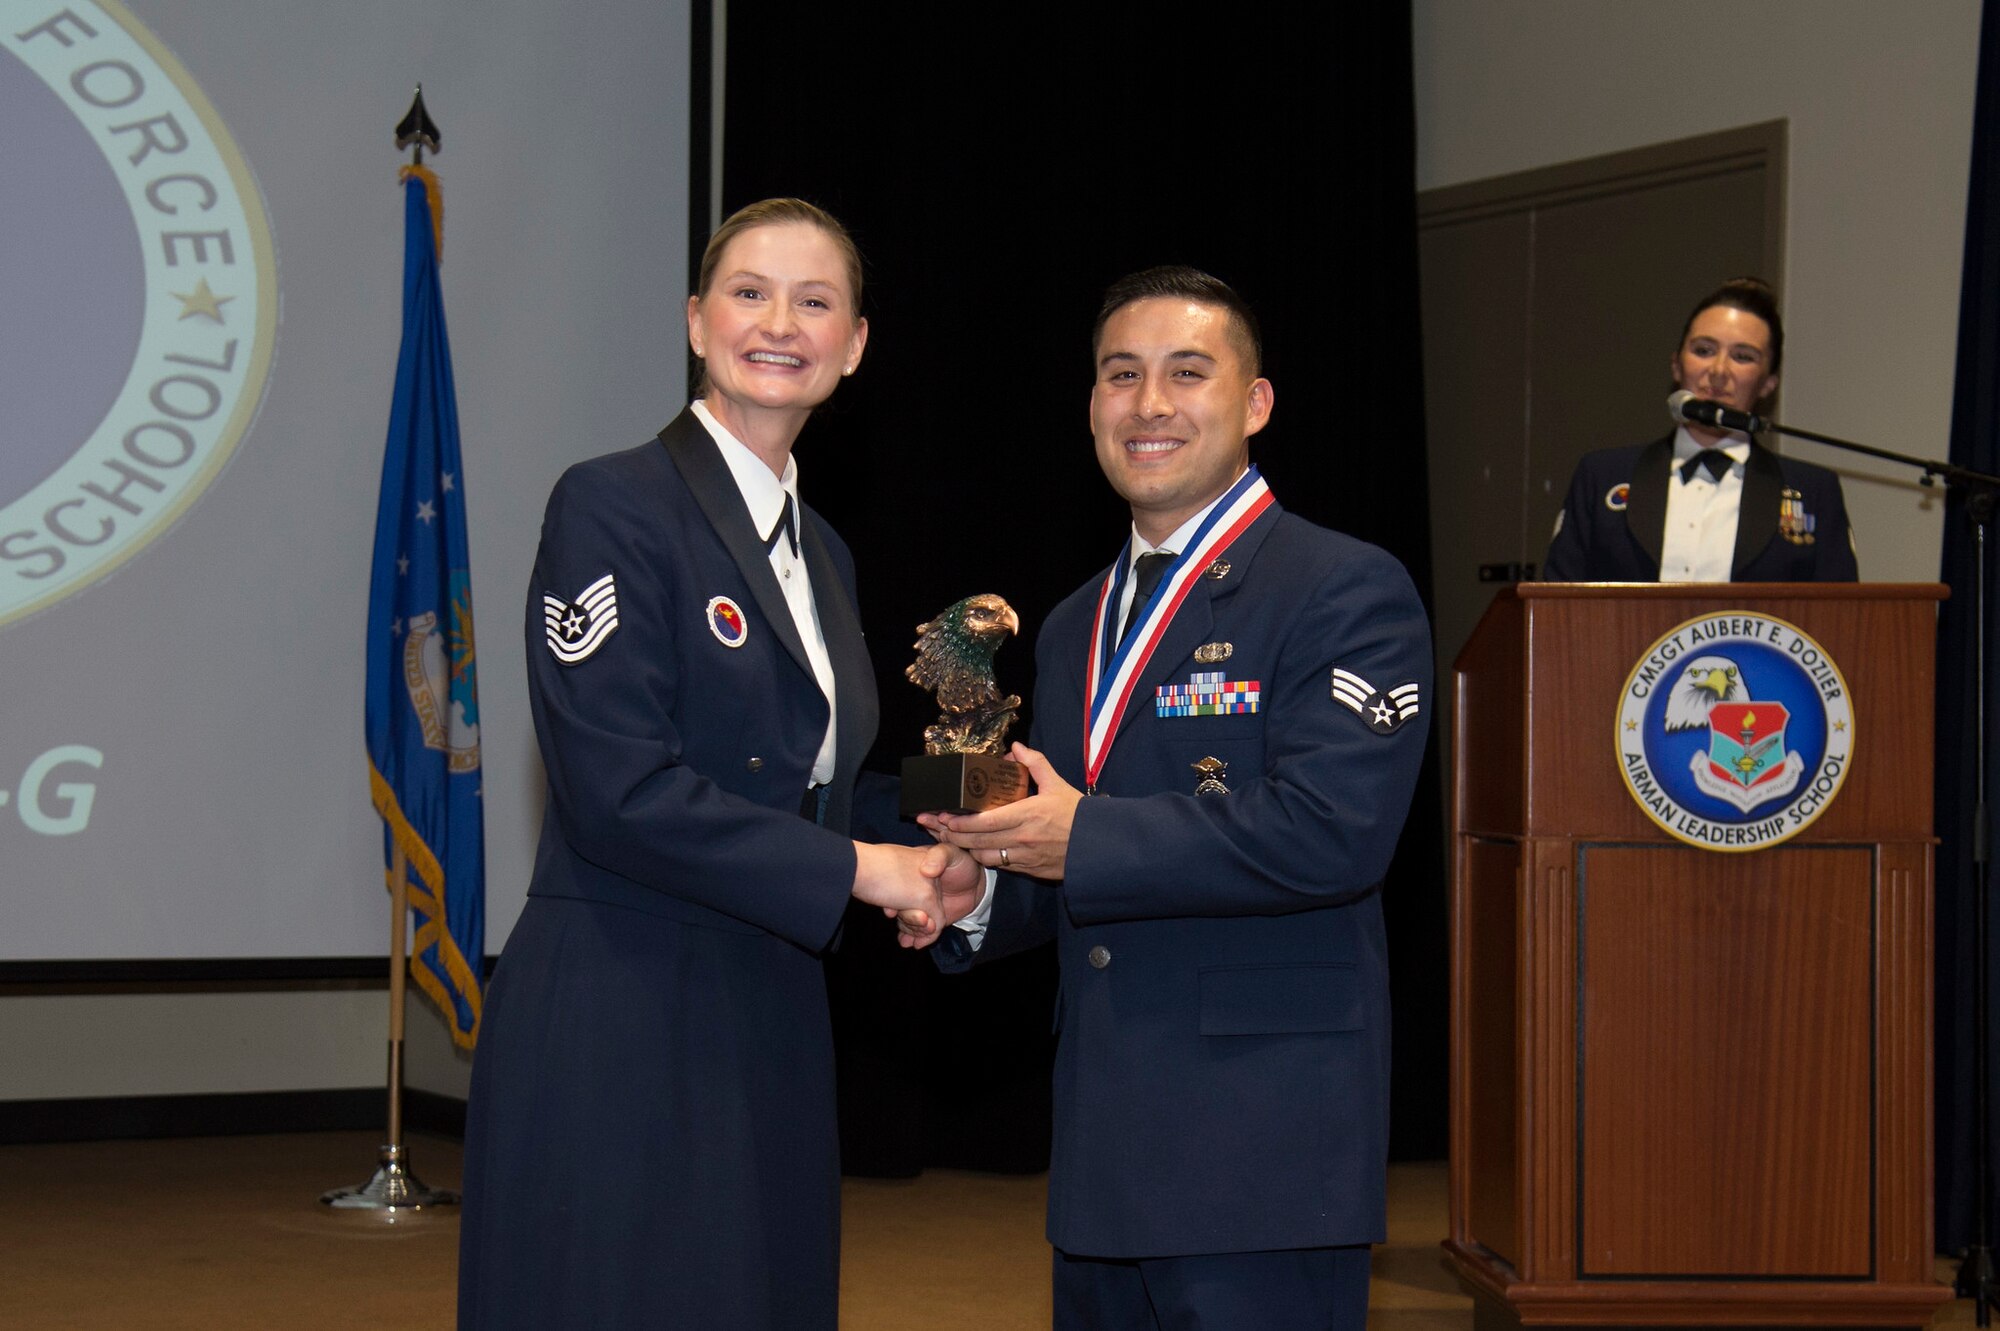 U.S. Air Force Tech. Sgt. Shawna Wise, a 6th Force Support Squadron Airman Leadership School (ALS) instructor, presents the Academic Achievement Award to Staff Sgt. Travis Somera, a 6th Security Forces Squadron entry controller, during an ALS graduation ceremony, Oct. 17, 2019, at MacDill Air Force Base, Fla.